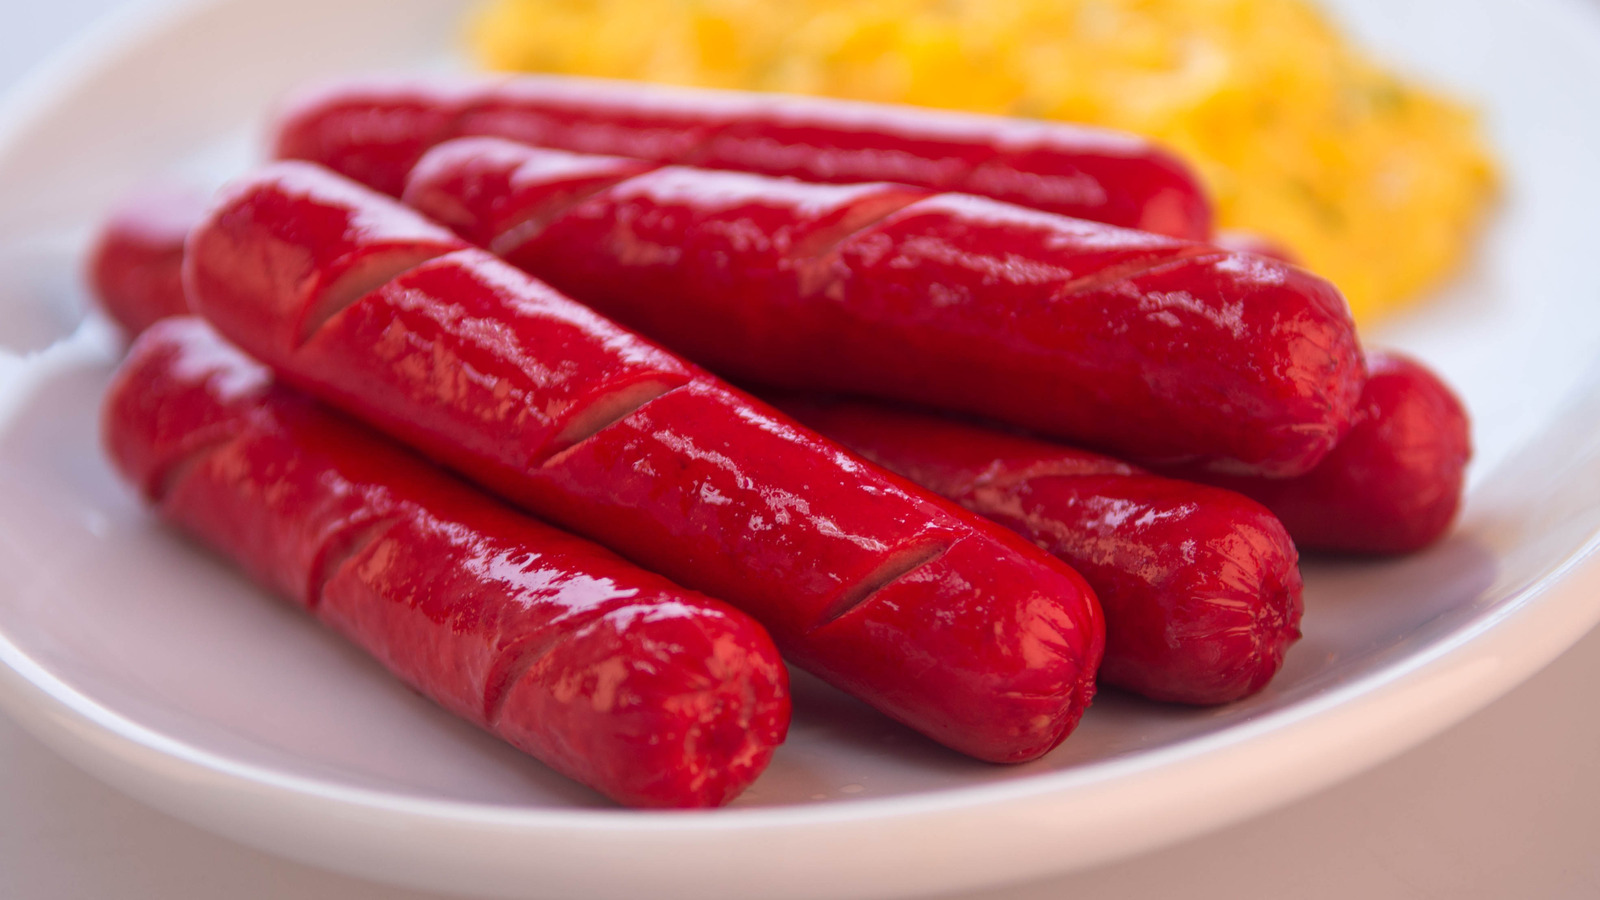 red hot dogs from maine